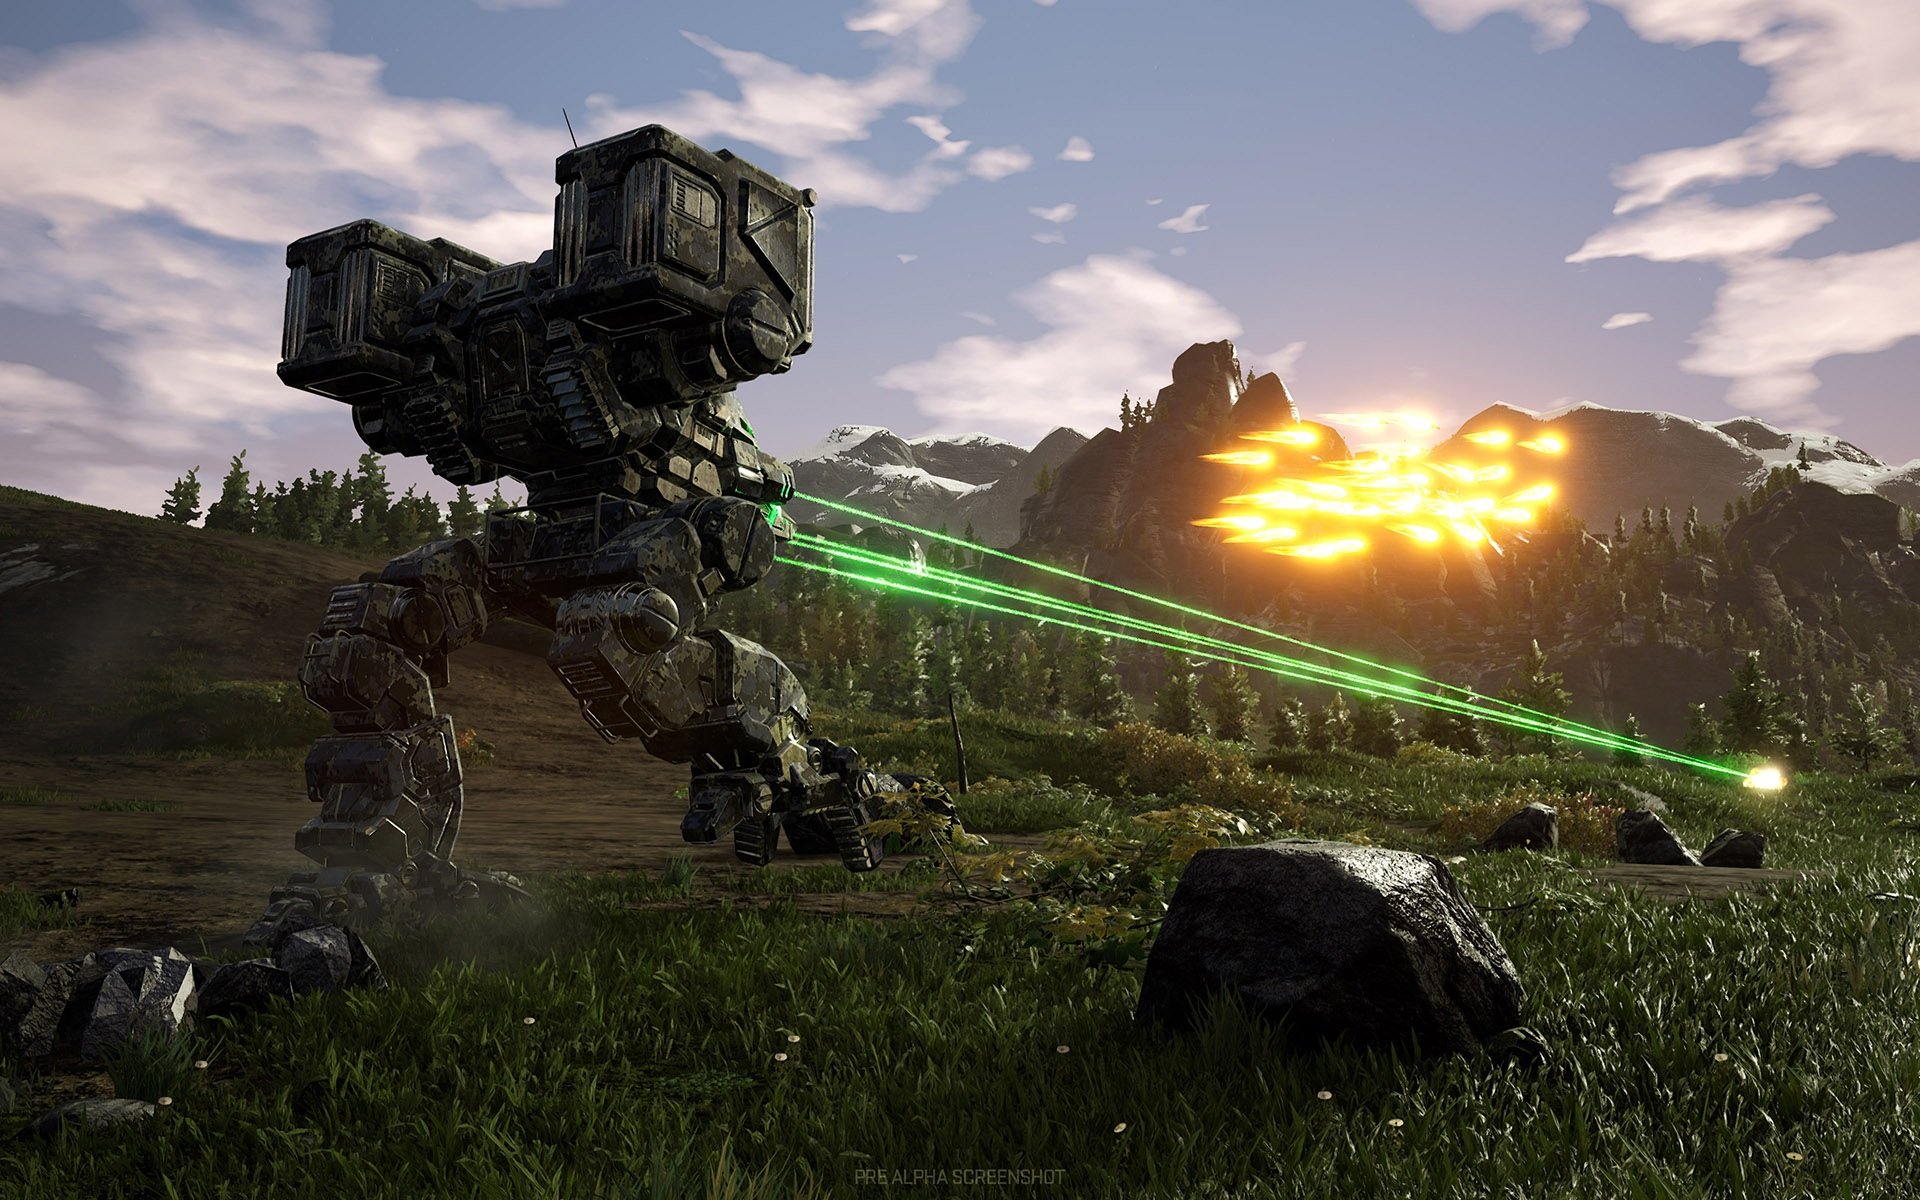 A new singleplayer MechWarrior game is in development VGC